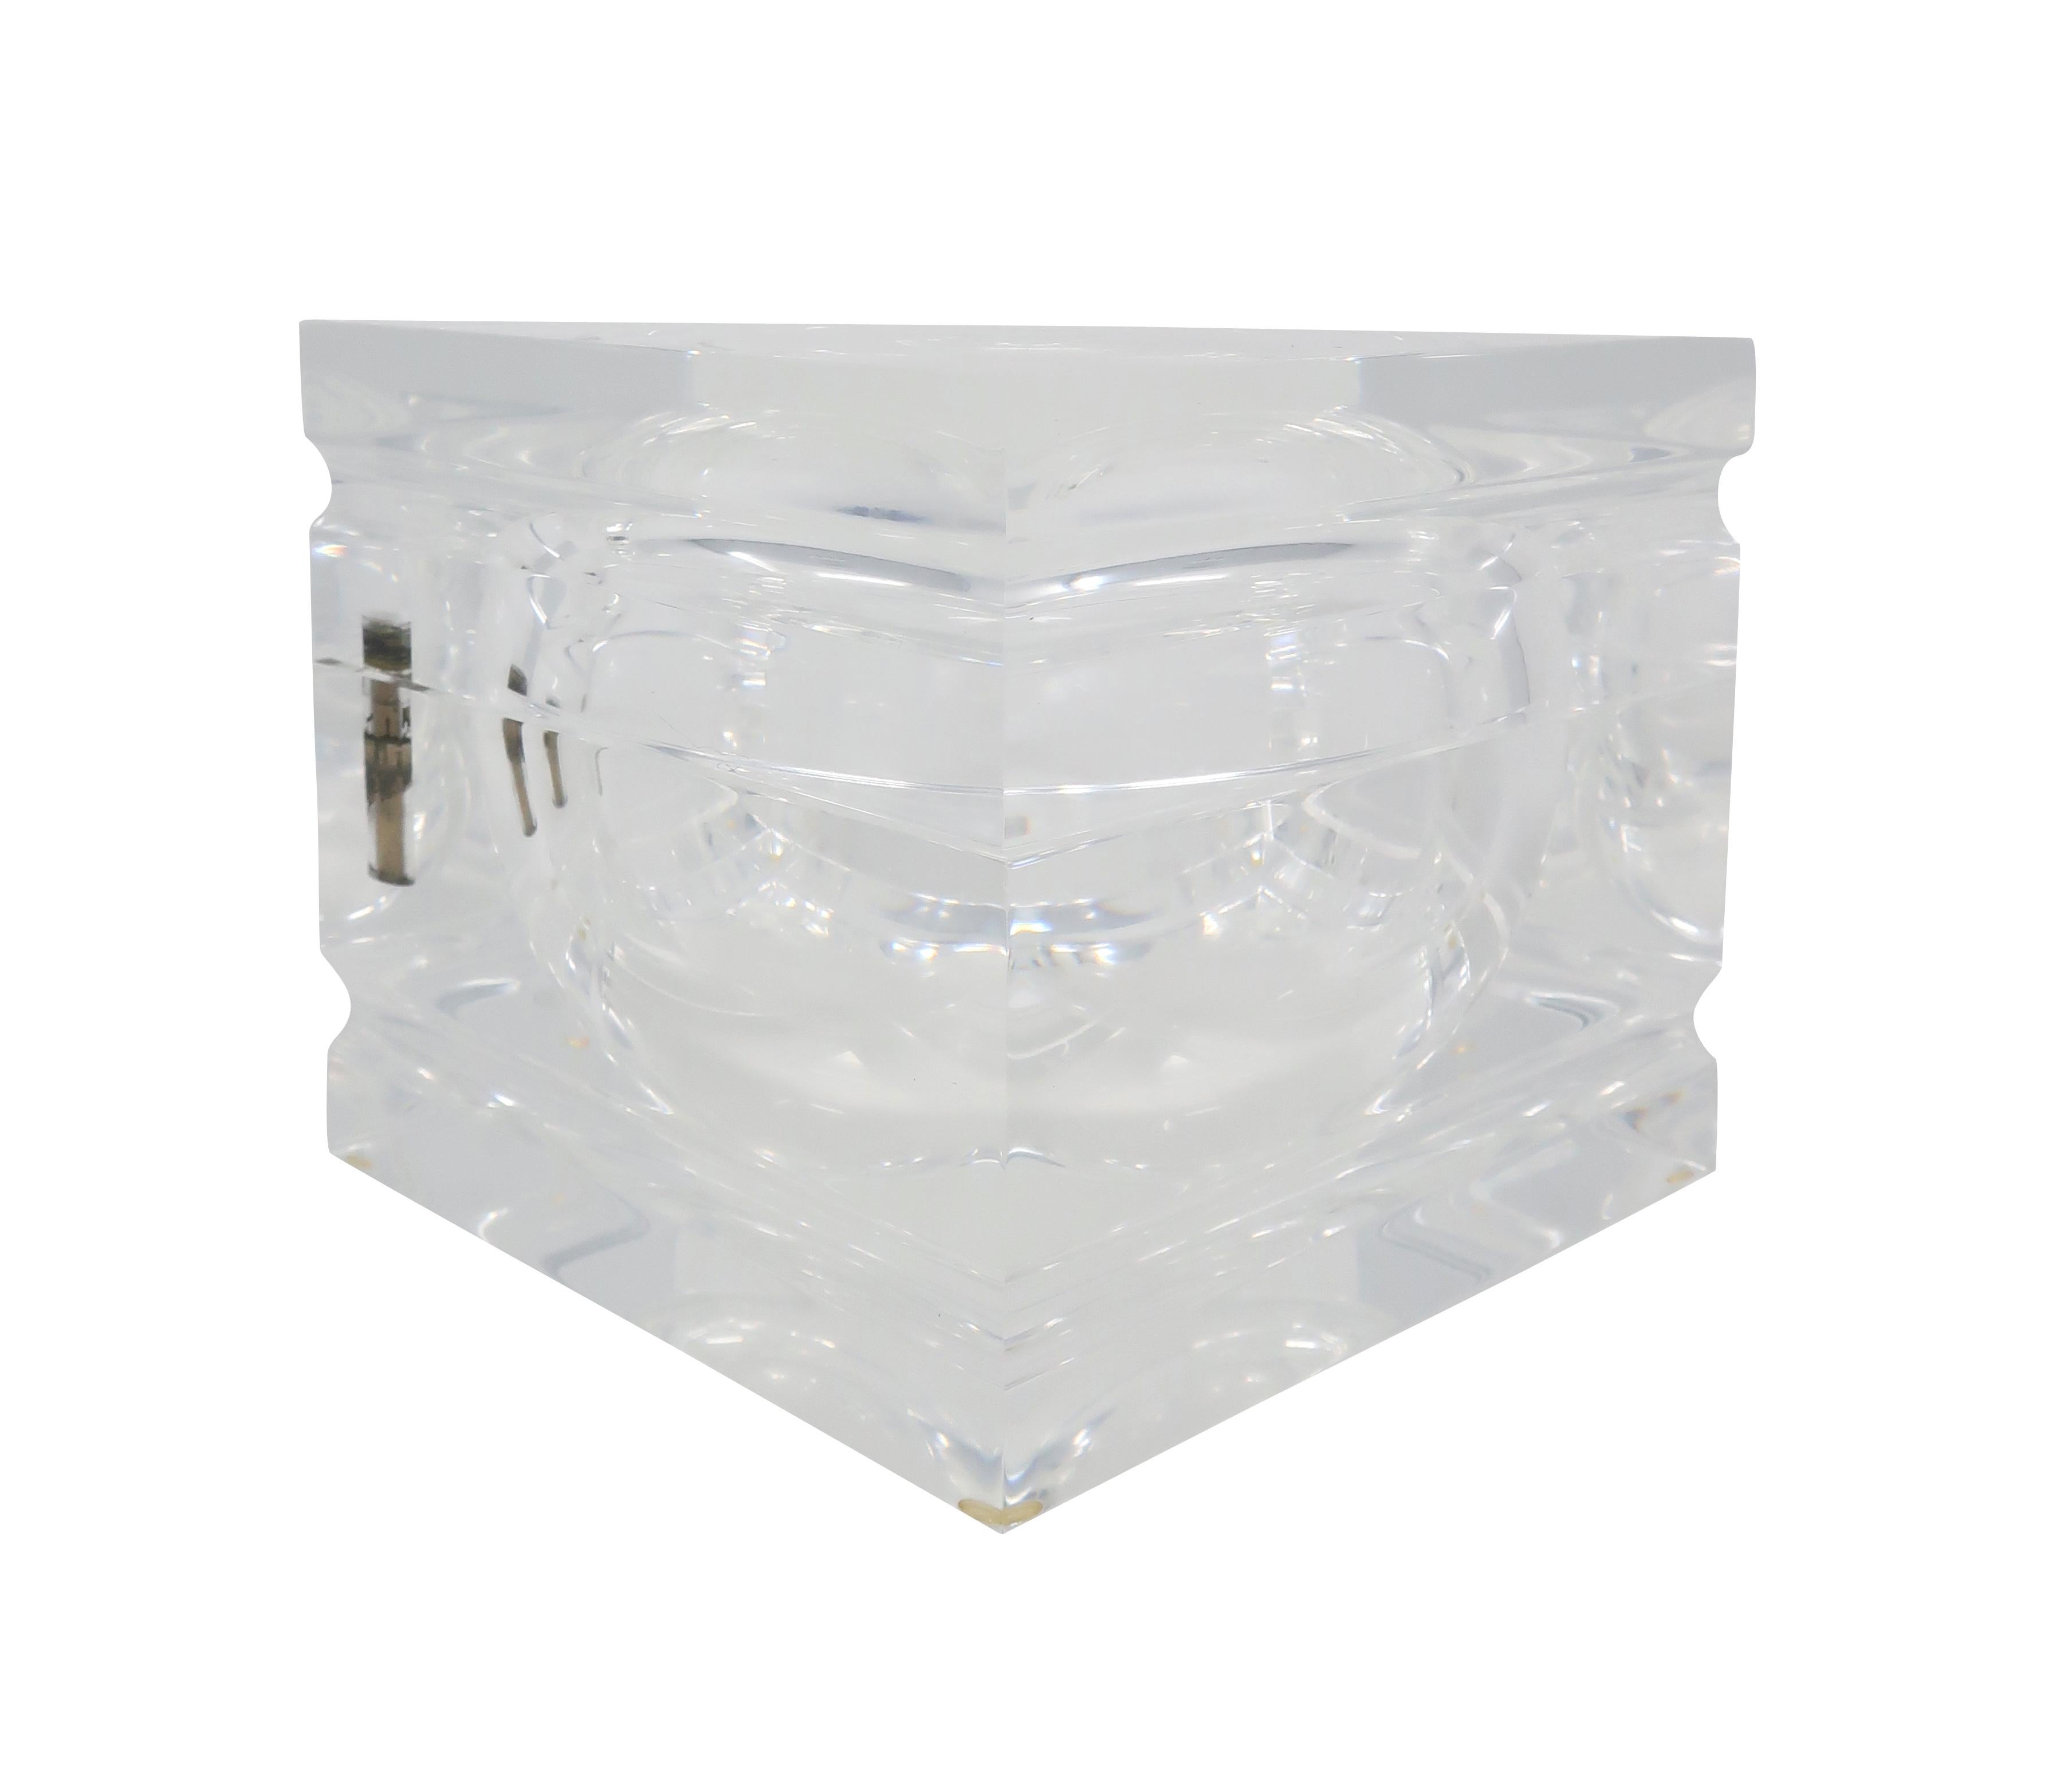 A stunning 1970s Lucite ice bucket attributed to Alessandro Albrizzi. The lid swivels on a pin to expose the ice storage within. Faceted edges that catch light beautifully. 

In very good vintage condition. Unmarked.

Measures: 6.75” x 6.75” x